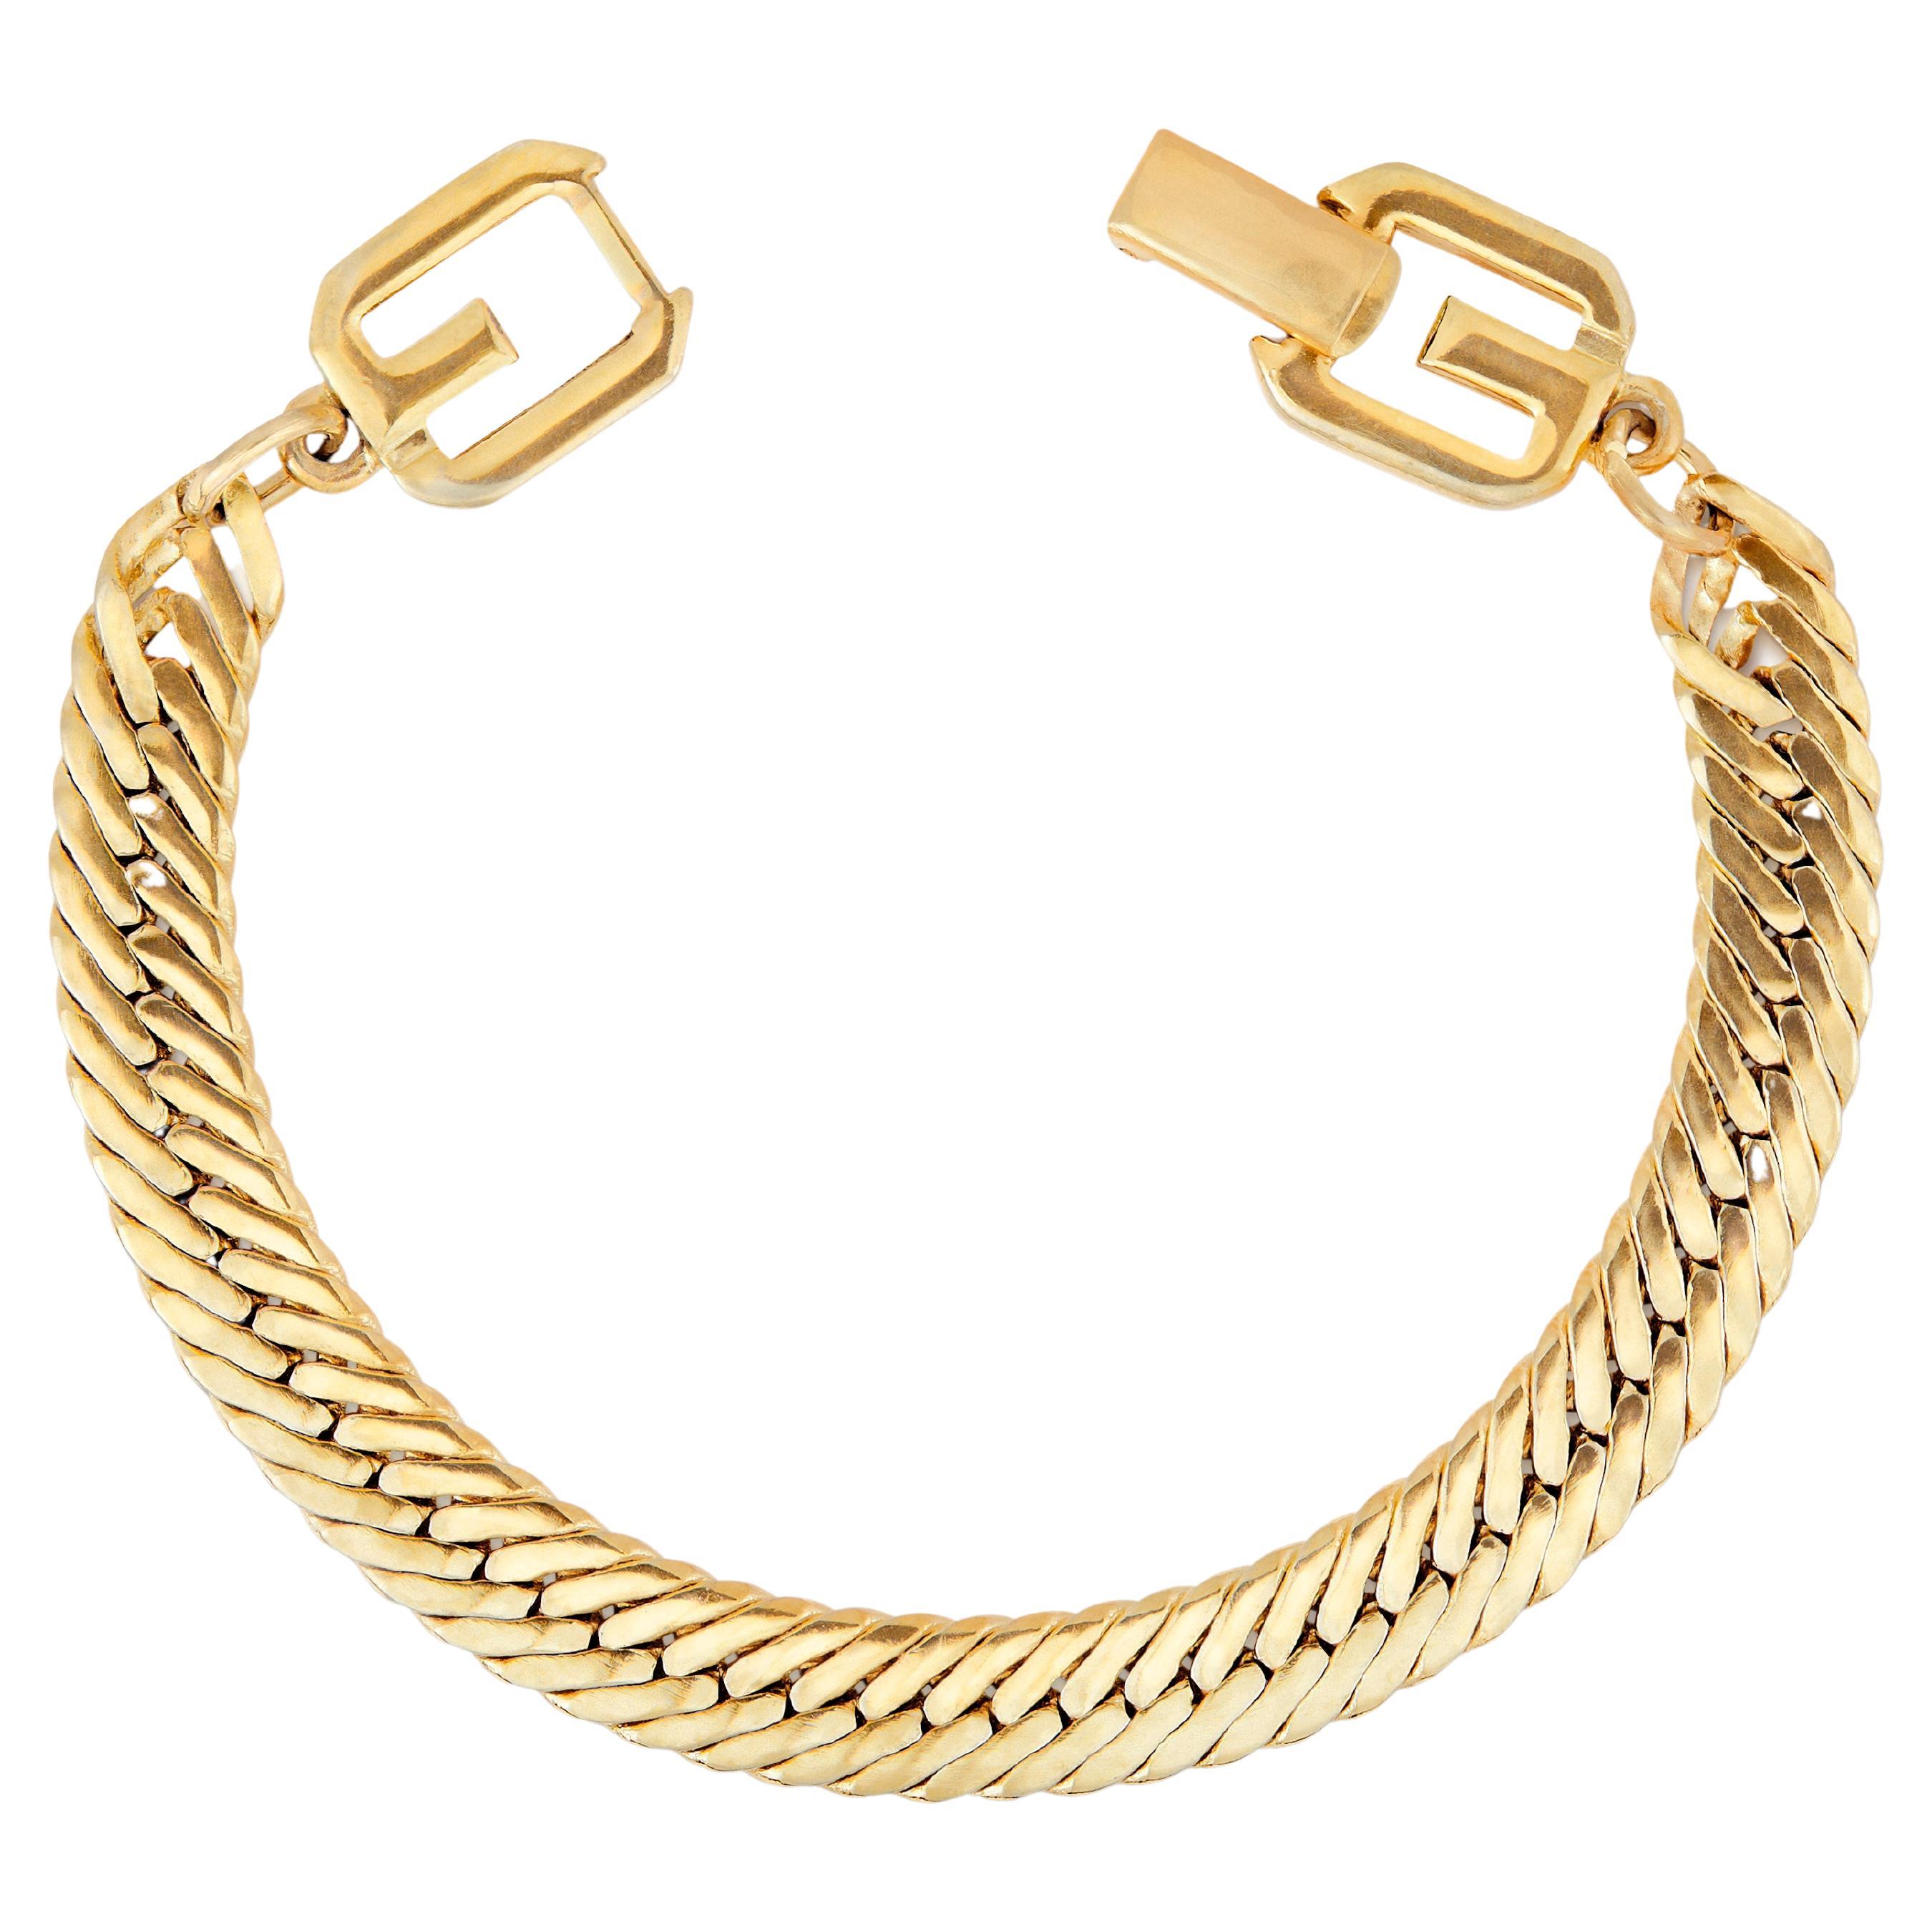 Vintage Givenchy Herringbone Chain Bracelet with Logo Clasp, 1980s For Sale